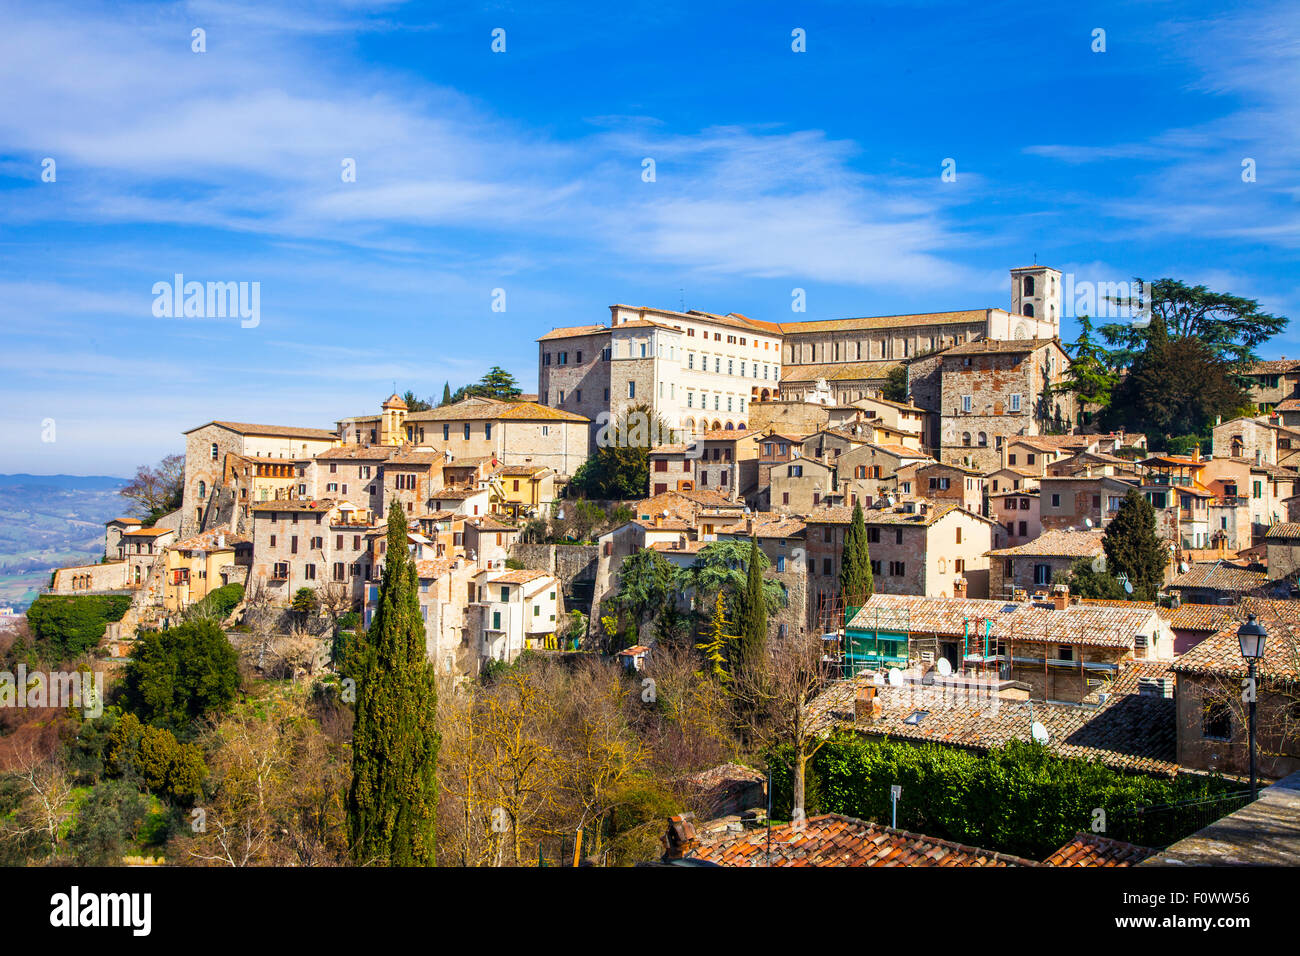 Authentic medieval town Todi in Umbria, Italy Stock Photo